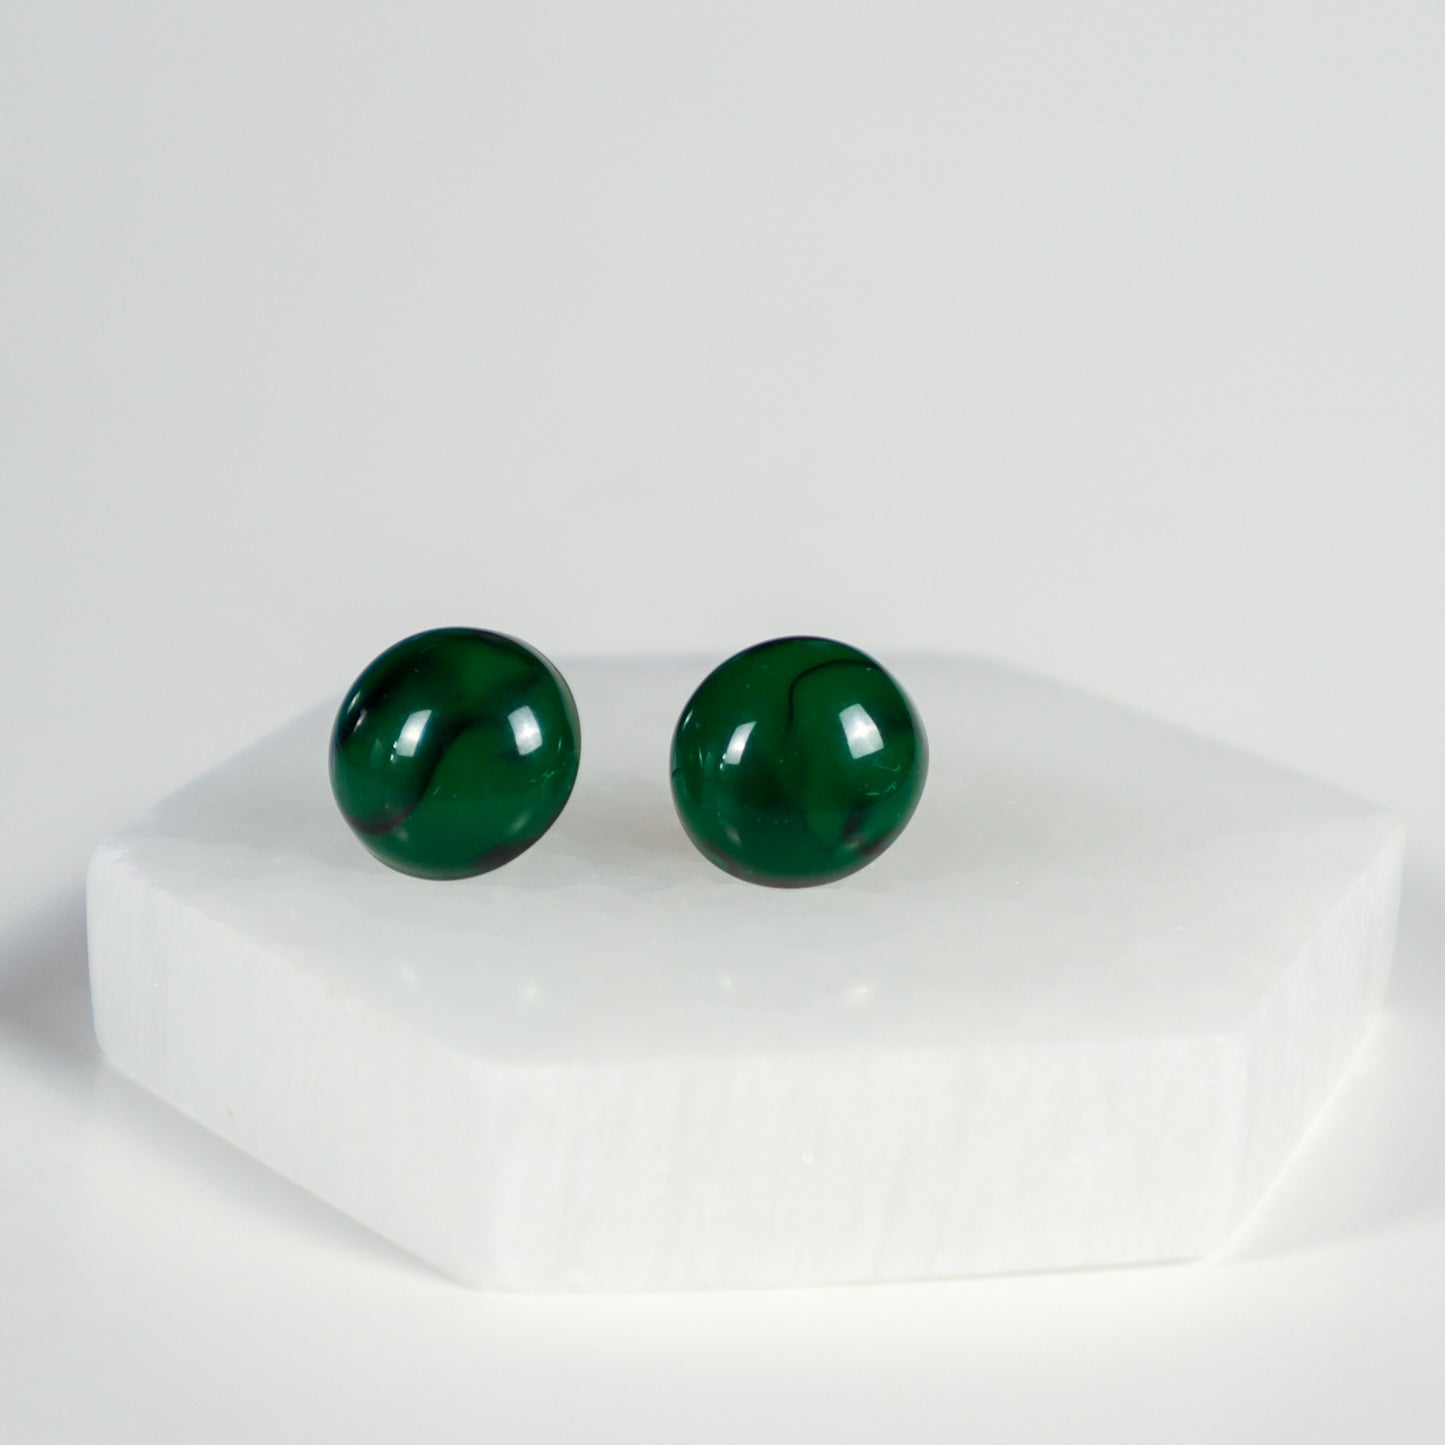 Mini Button Earrings - Forest Green with Black